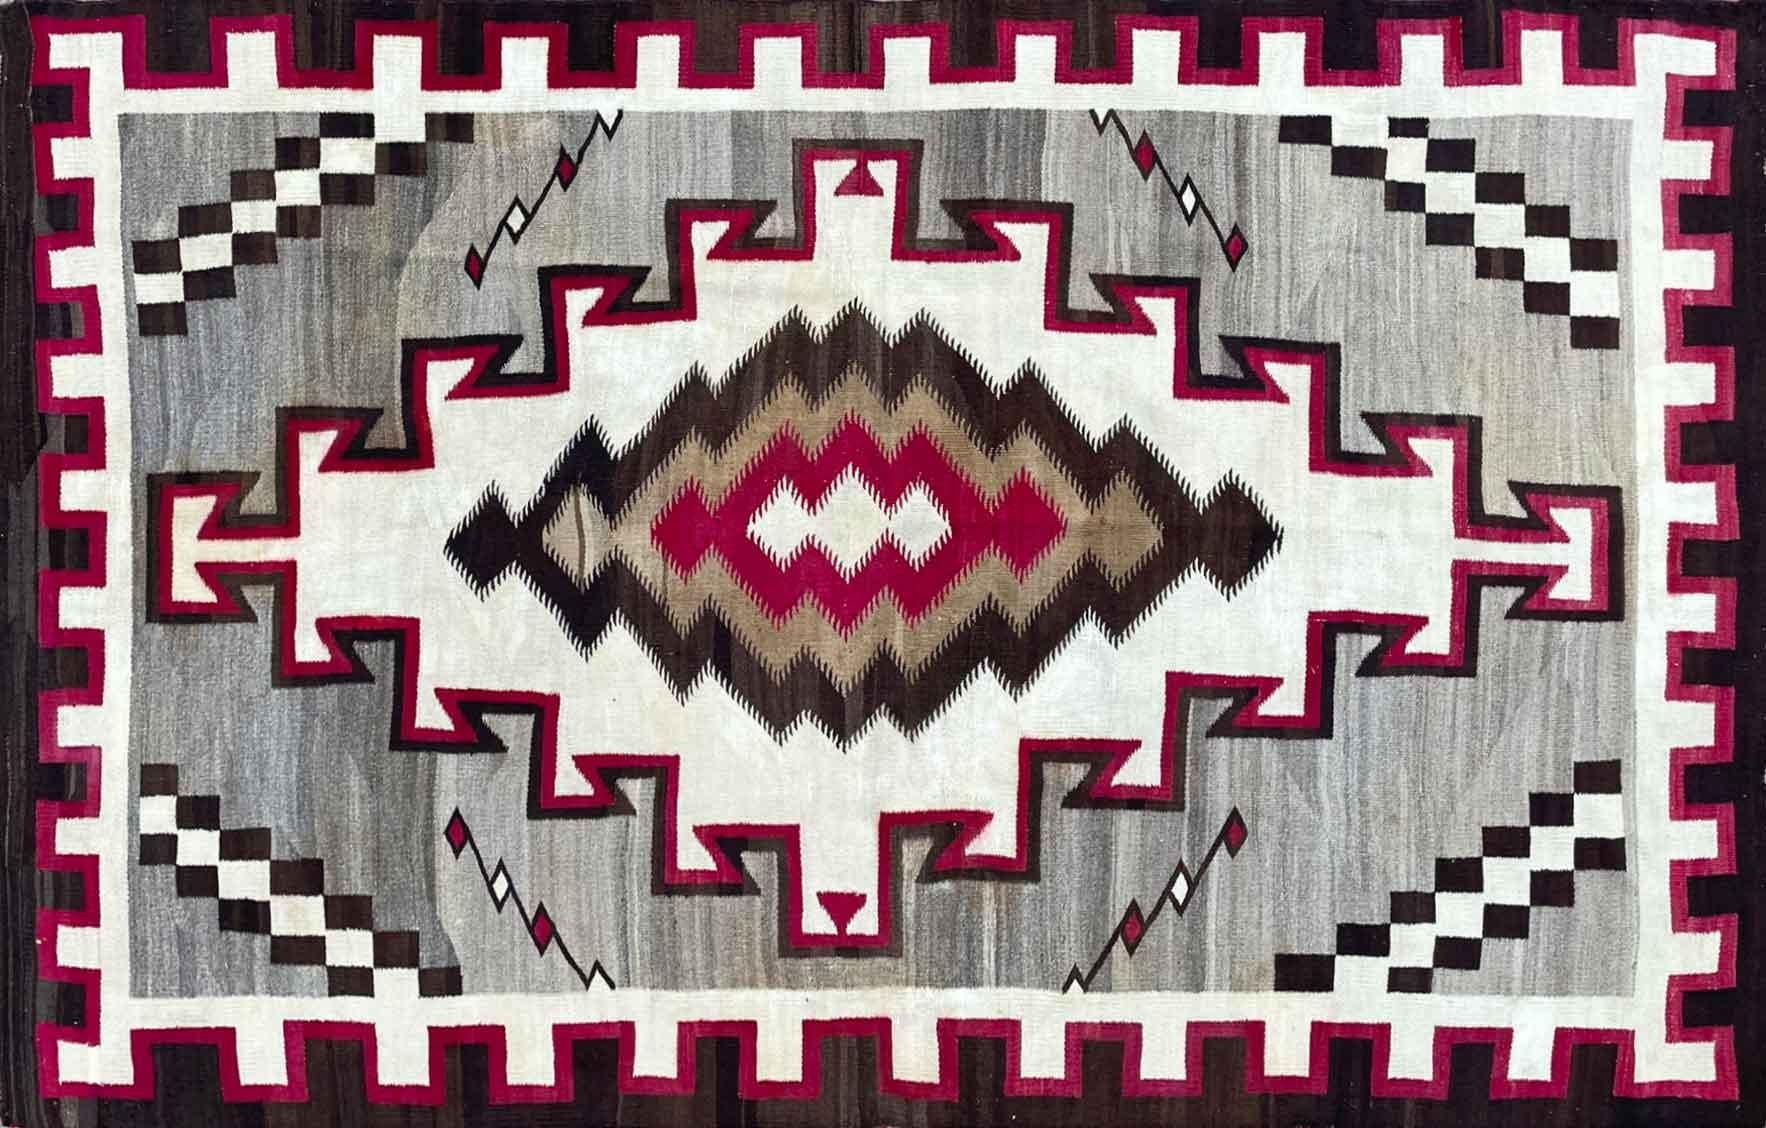 On offer is a rare antique Navajo rug, a truly magnificent piece of textile, circa 1920s-1930s. Distinguished in its massive size (68 by 110 inches), intricate designs and superb workmanship, this Klagetoh weaving is rather unusual in that instead